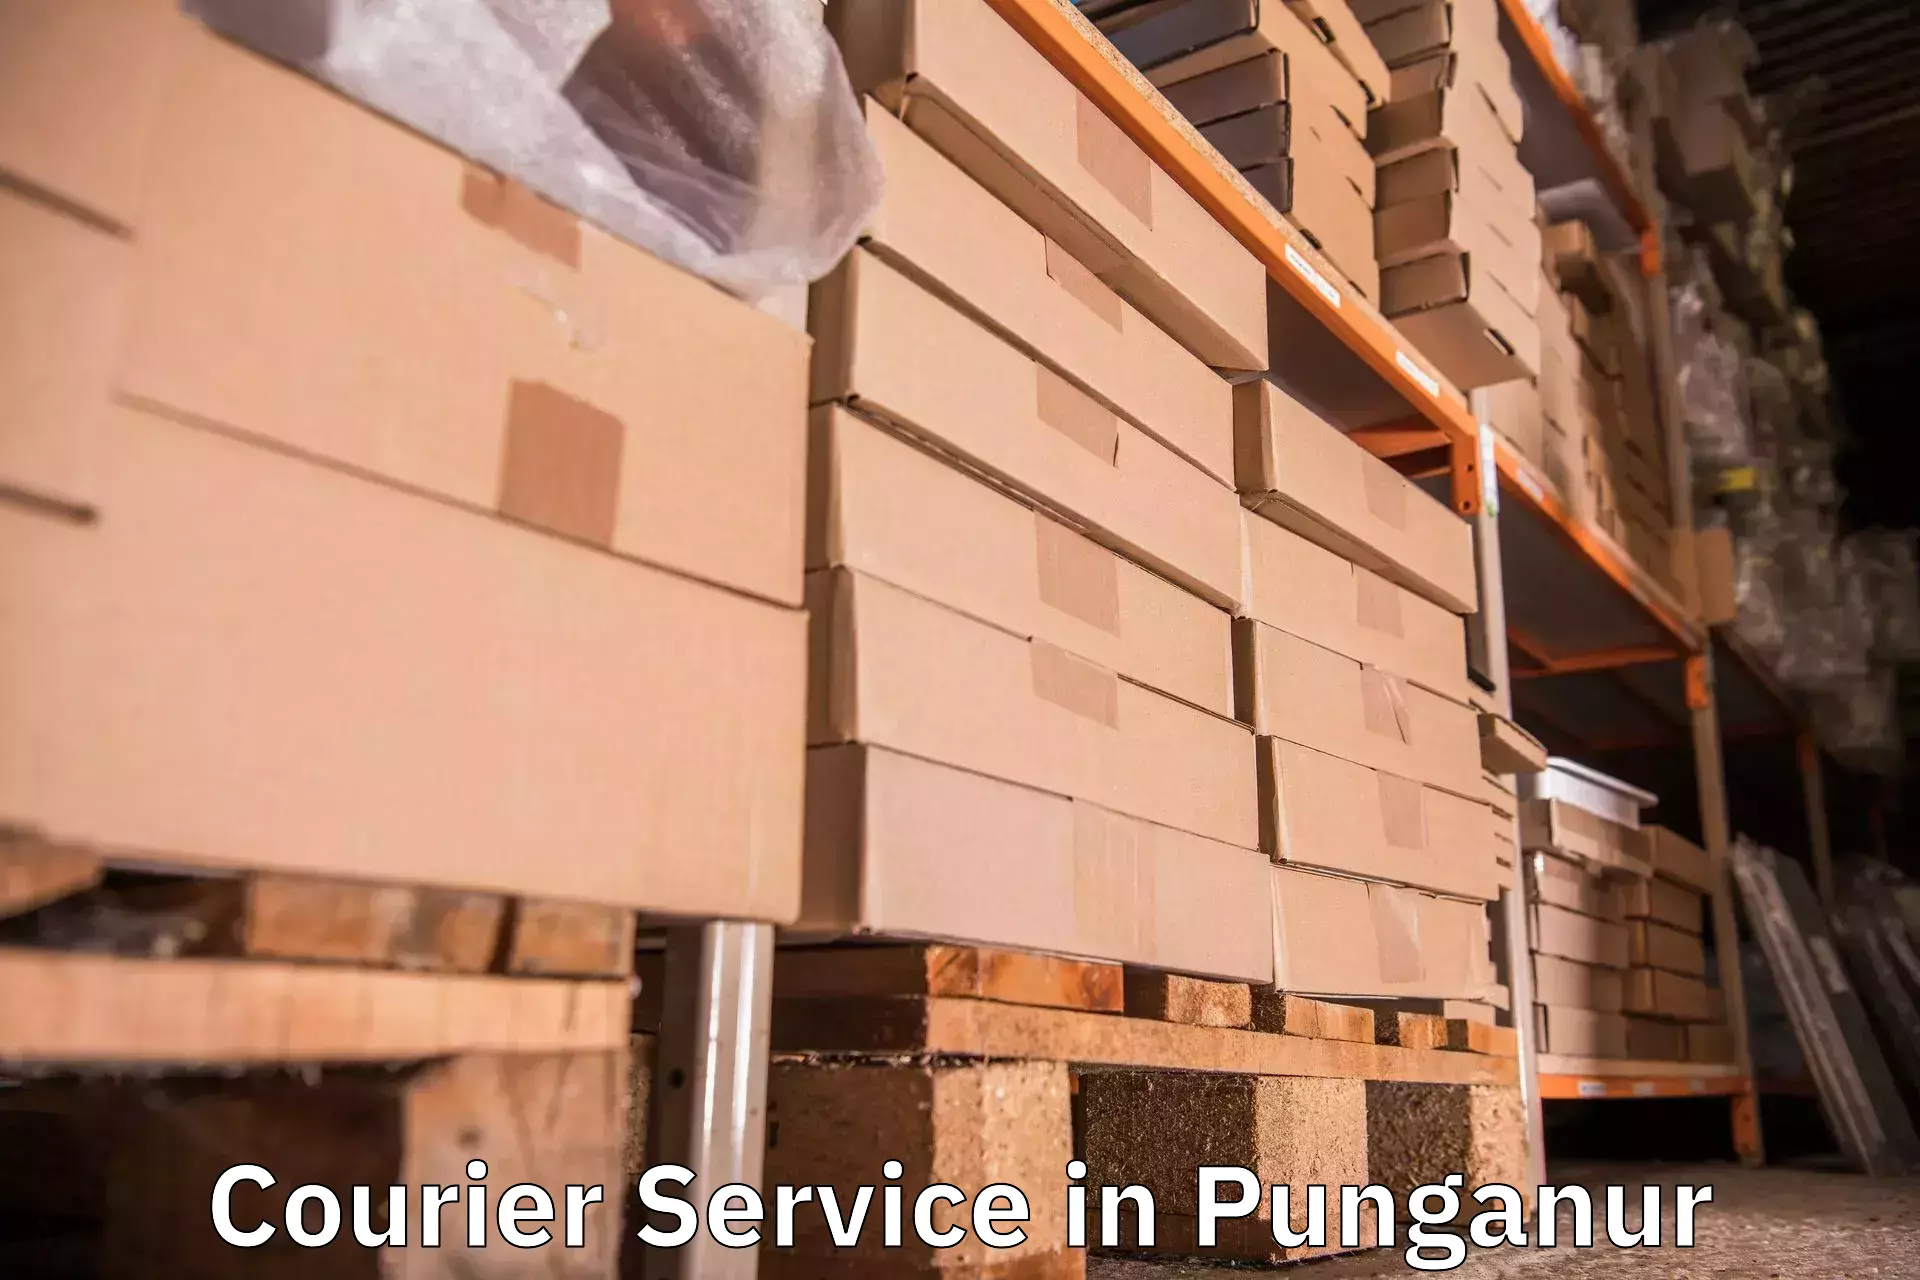 Express courier capabilities in Punganur